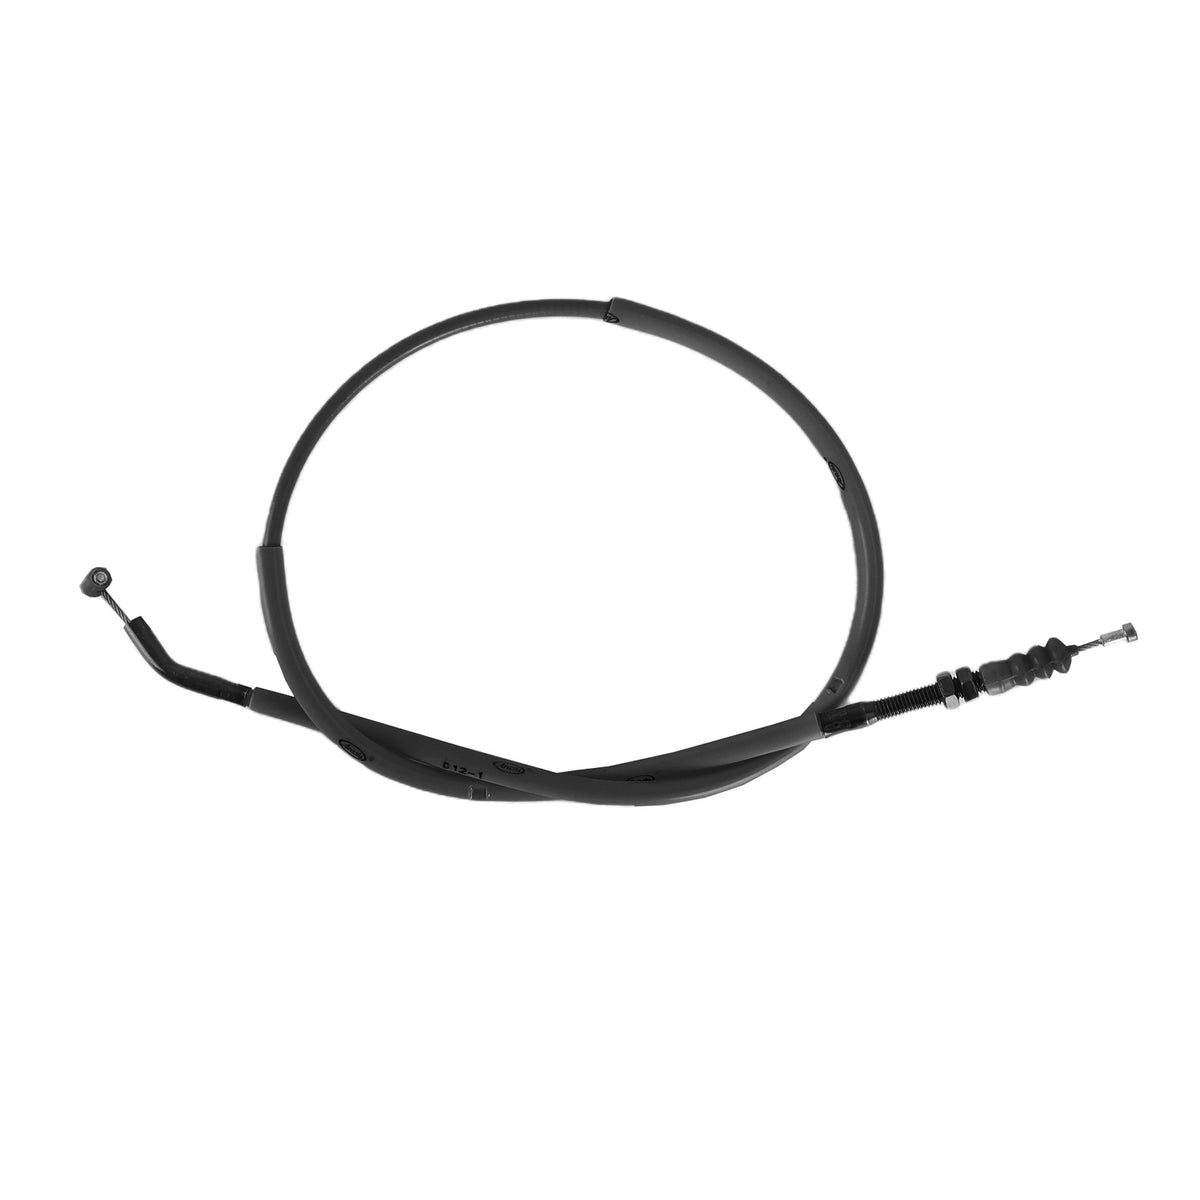 17-20 Kawasaki Z650 Motorcycle Clutch Cable Replacement